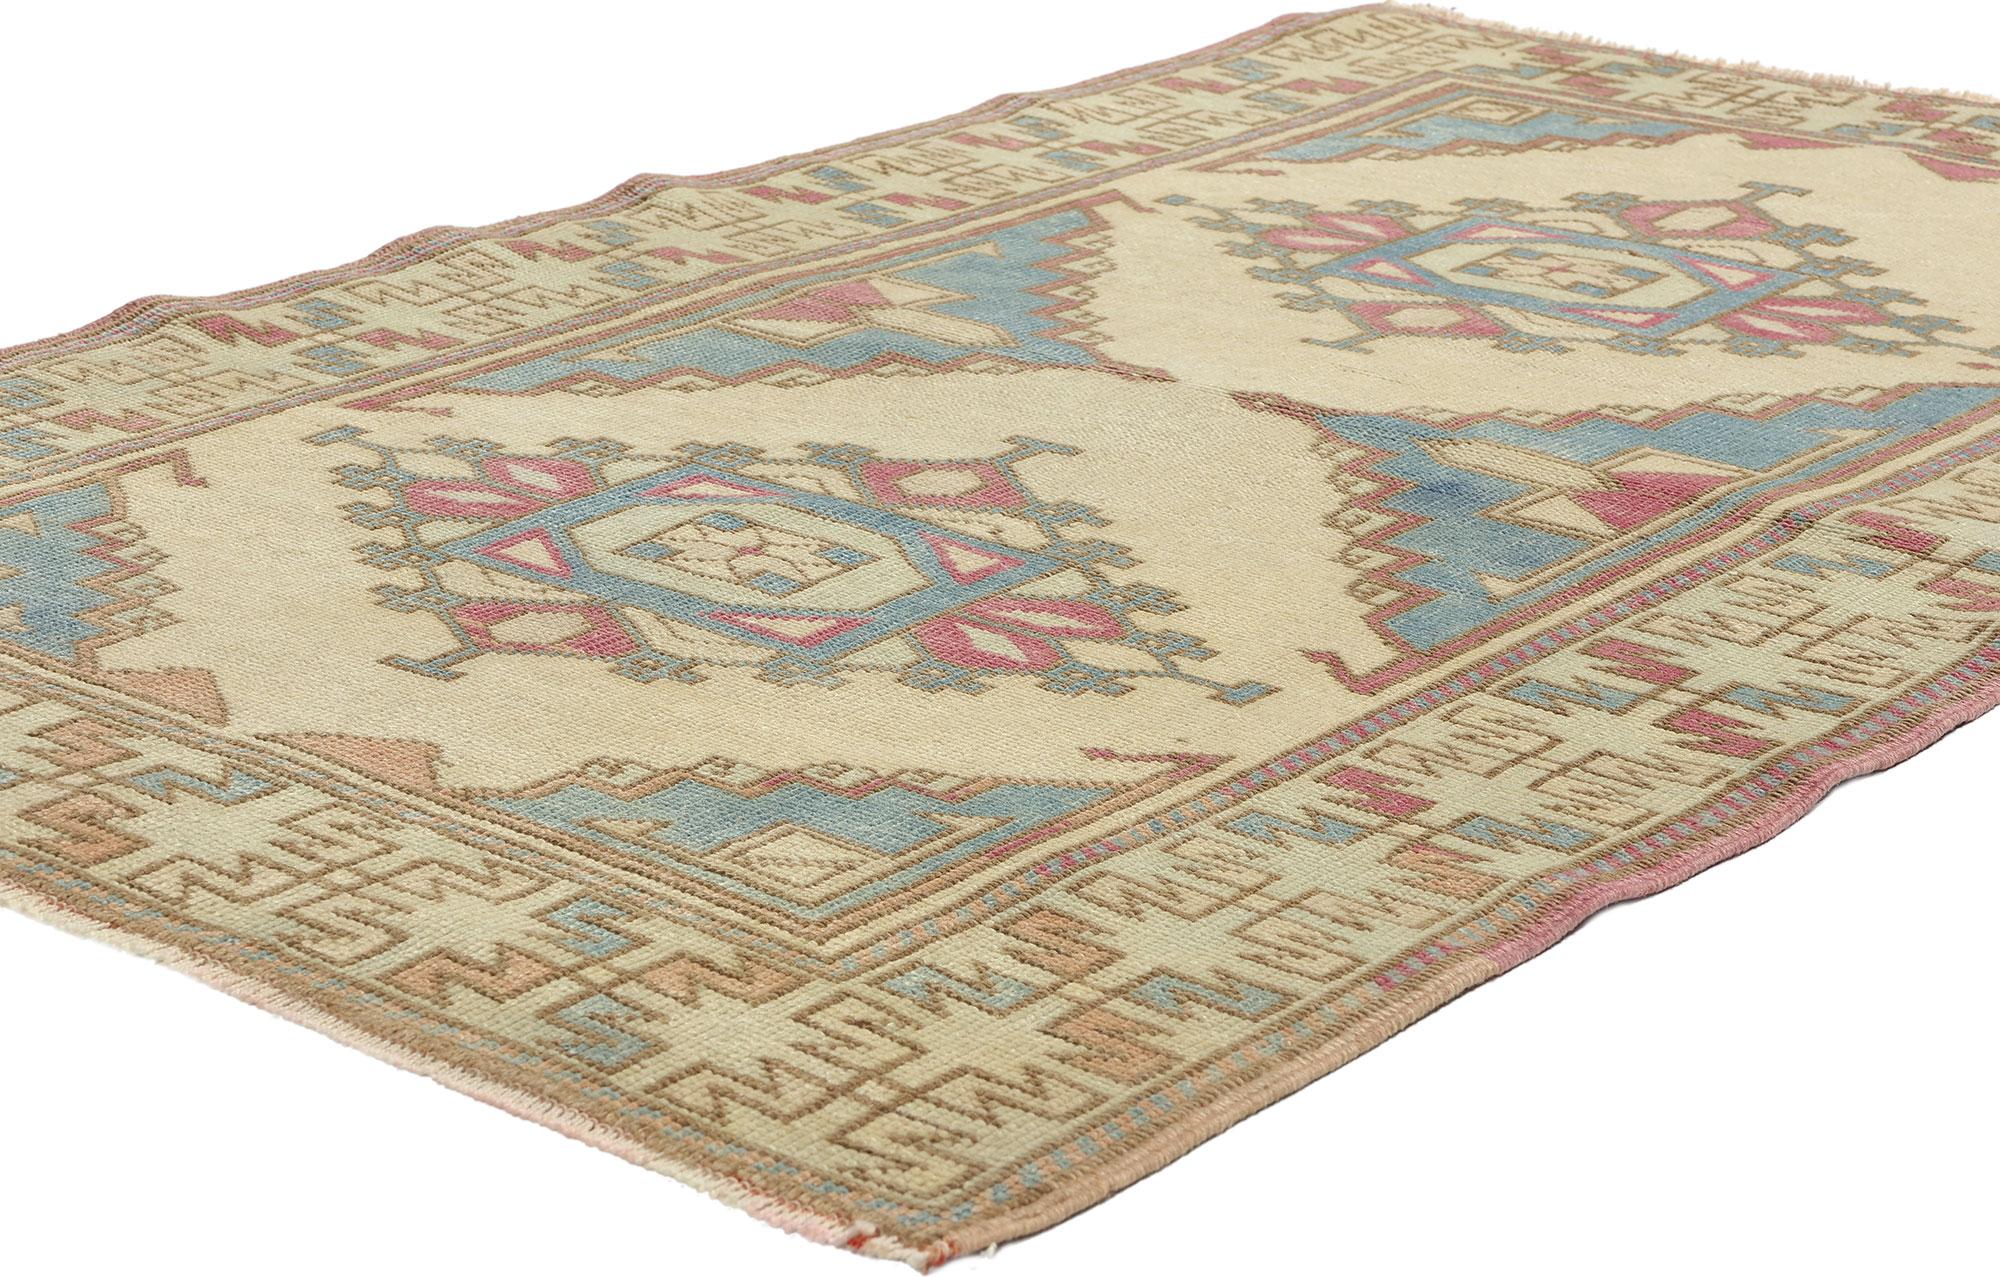 53926 Vintage Pink & Blue Turkish Oushak Rug, 03'02 x 05'00. Emerging from the Western expanse of Oushak in Turkey, Turkish Oushak rugs have earned widespread admiration for their intricate designs, gentle color palettes, and premium wool materials.